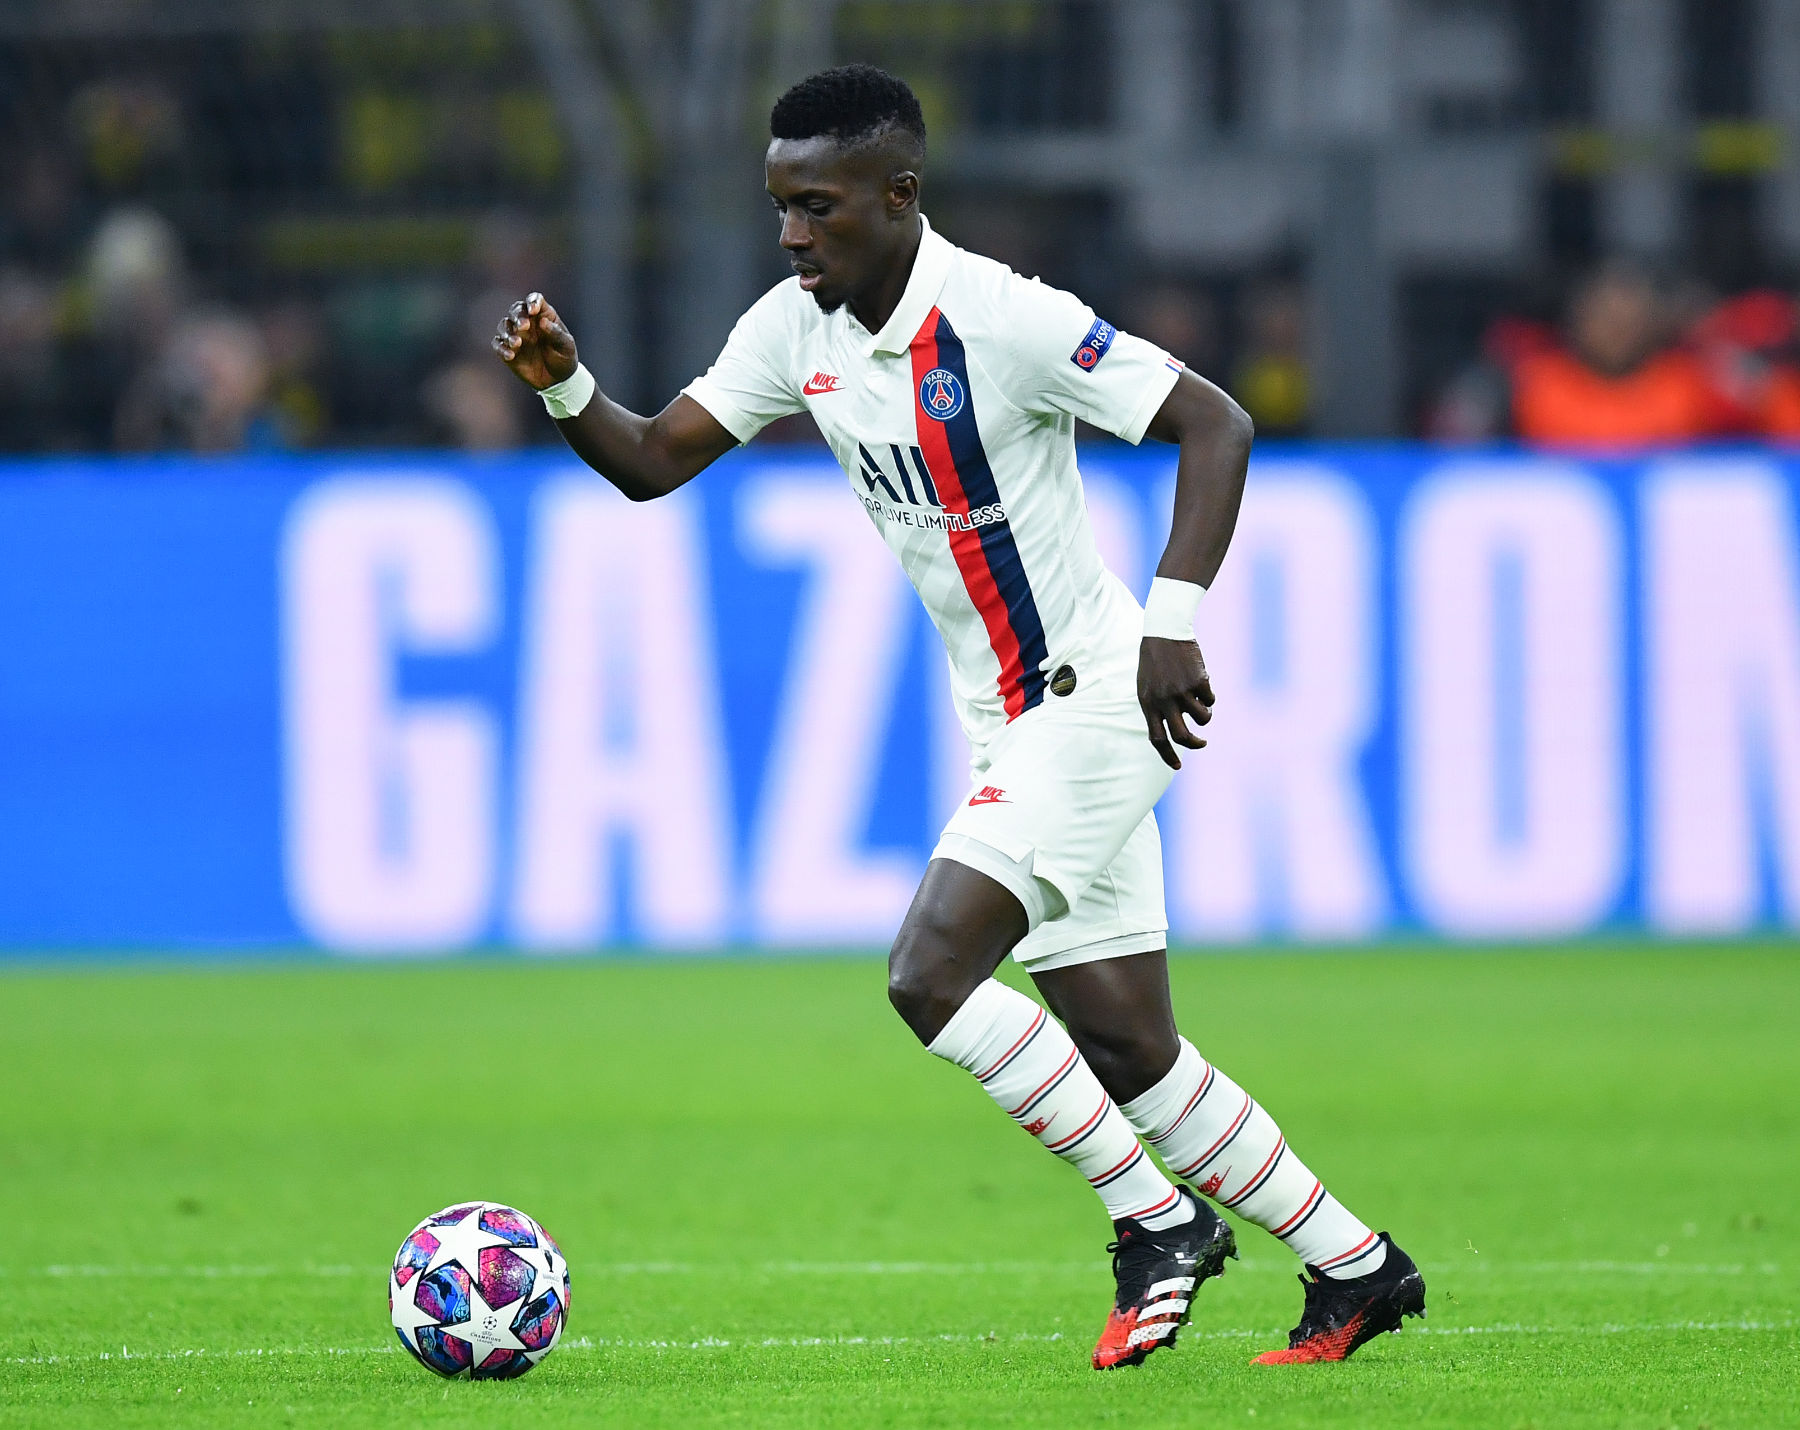 2 Premier League Clubs Interested in Signing Gueye - PSG Talk